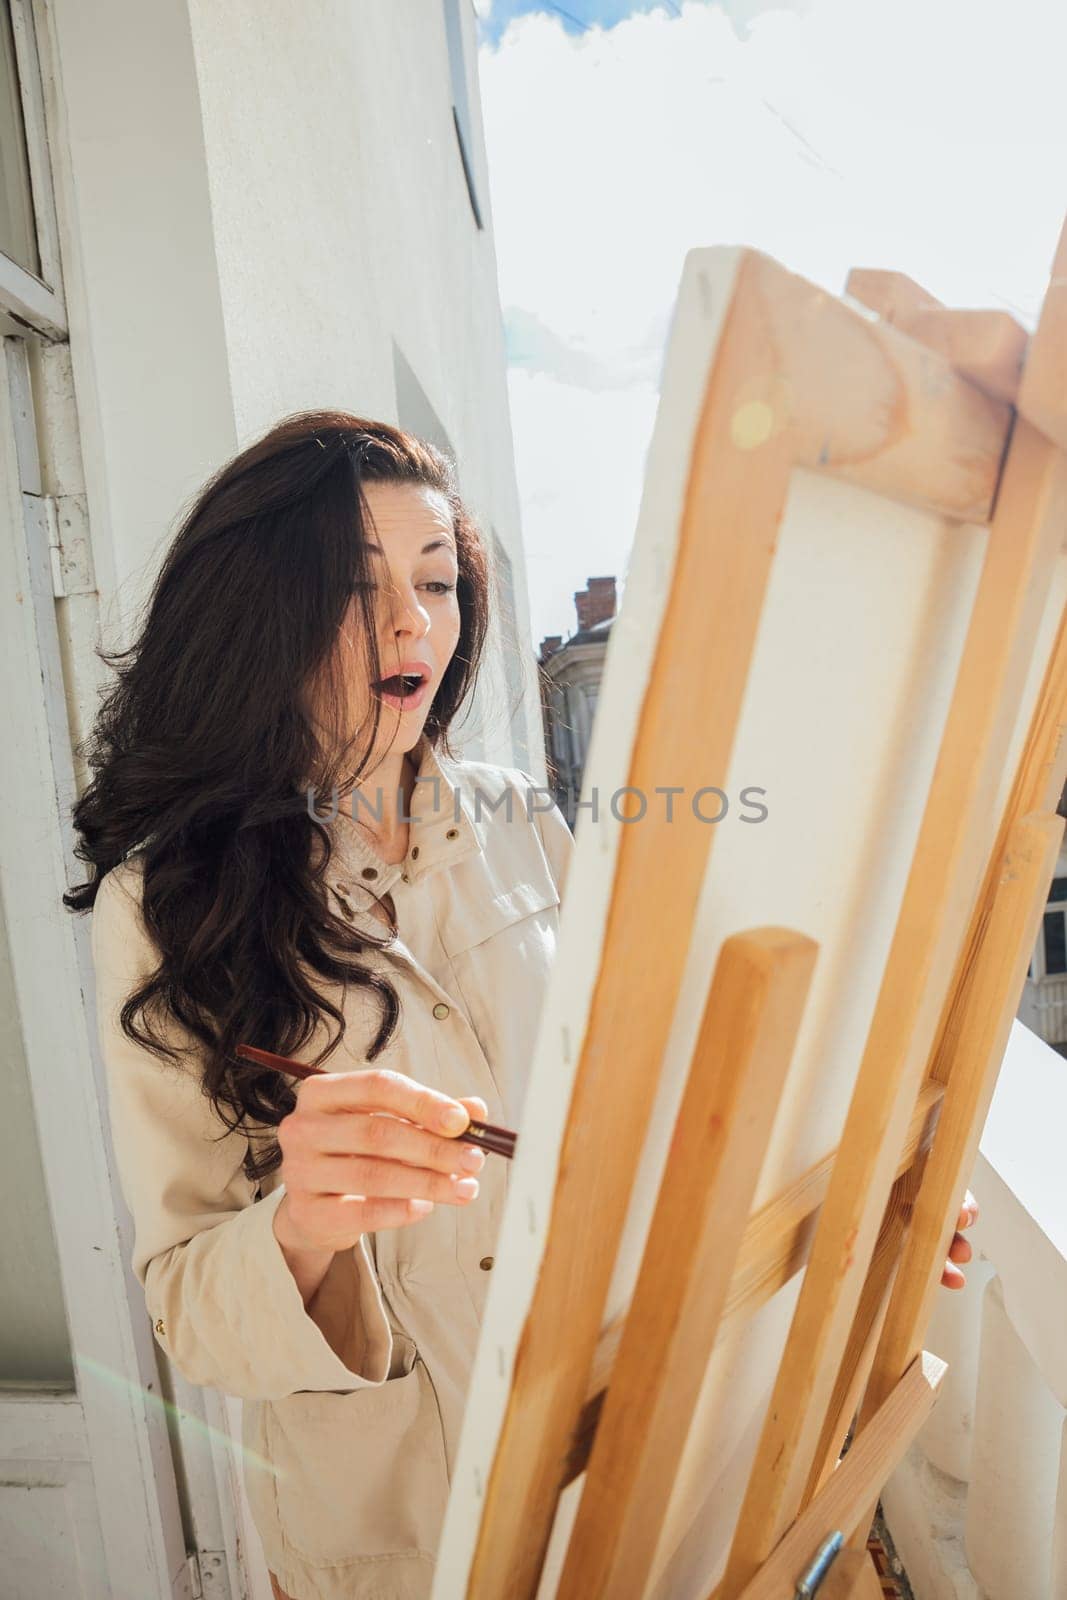 a woman artist stands with a brush for drawing draws on an easel by Simakov